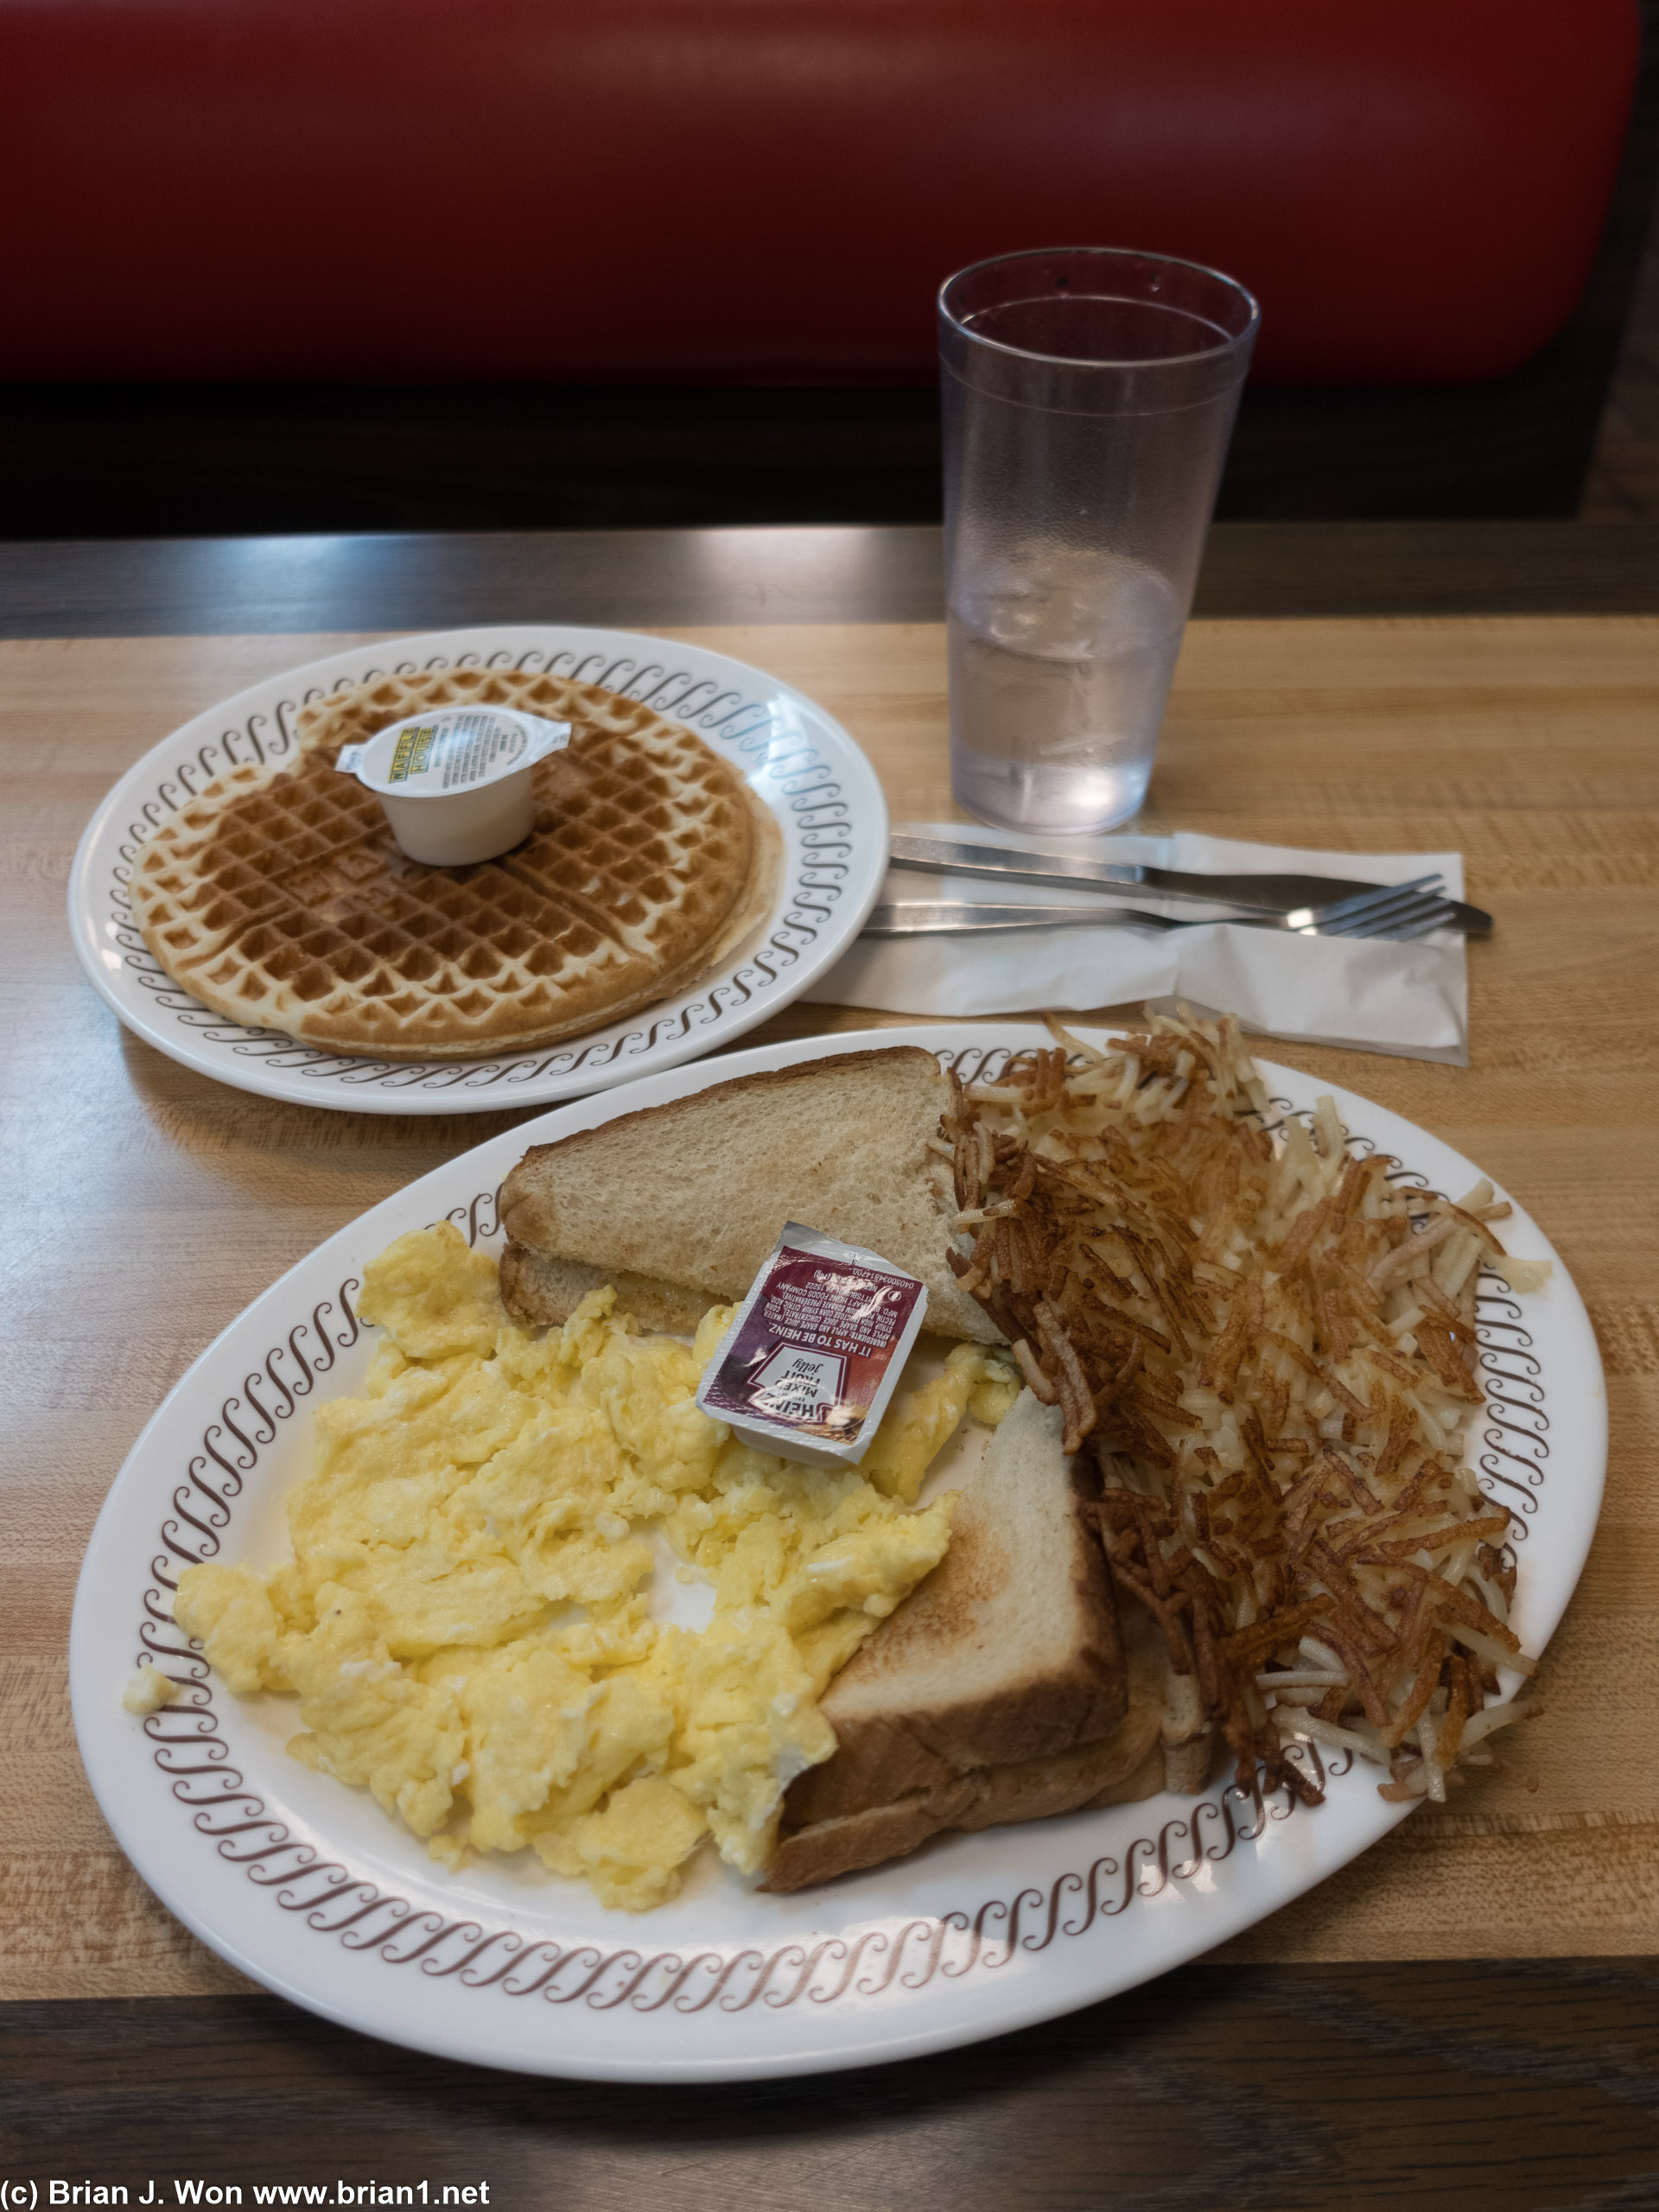 The classic Waffle House meal.